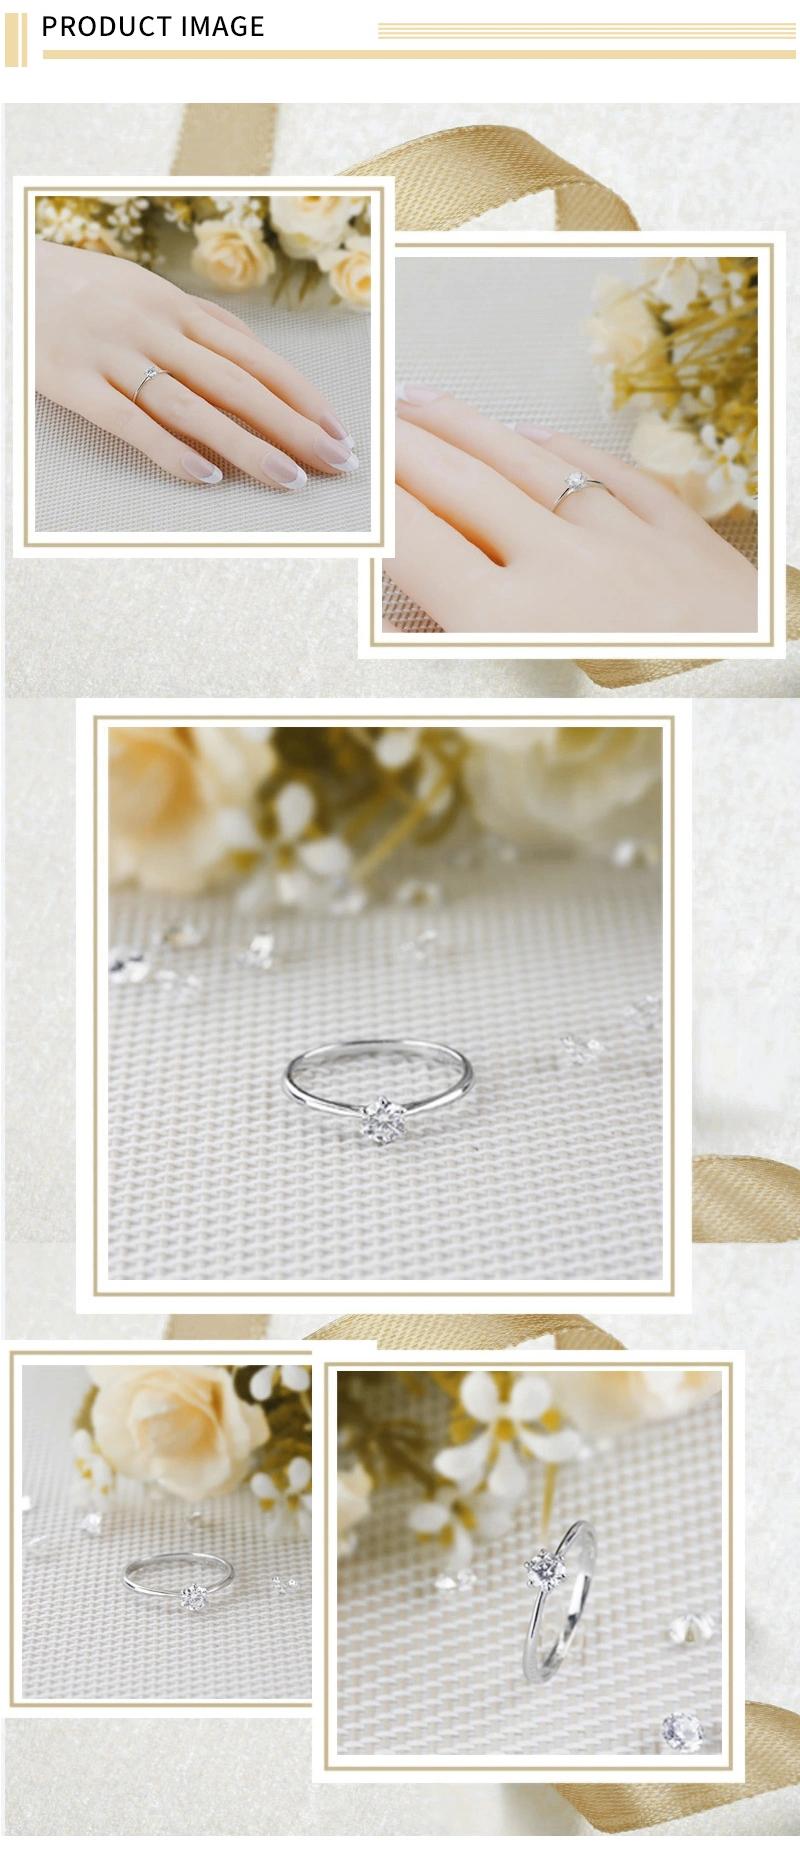 Charming 925 Silver Rings Jewelry Fashion Silver Ring